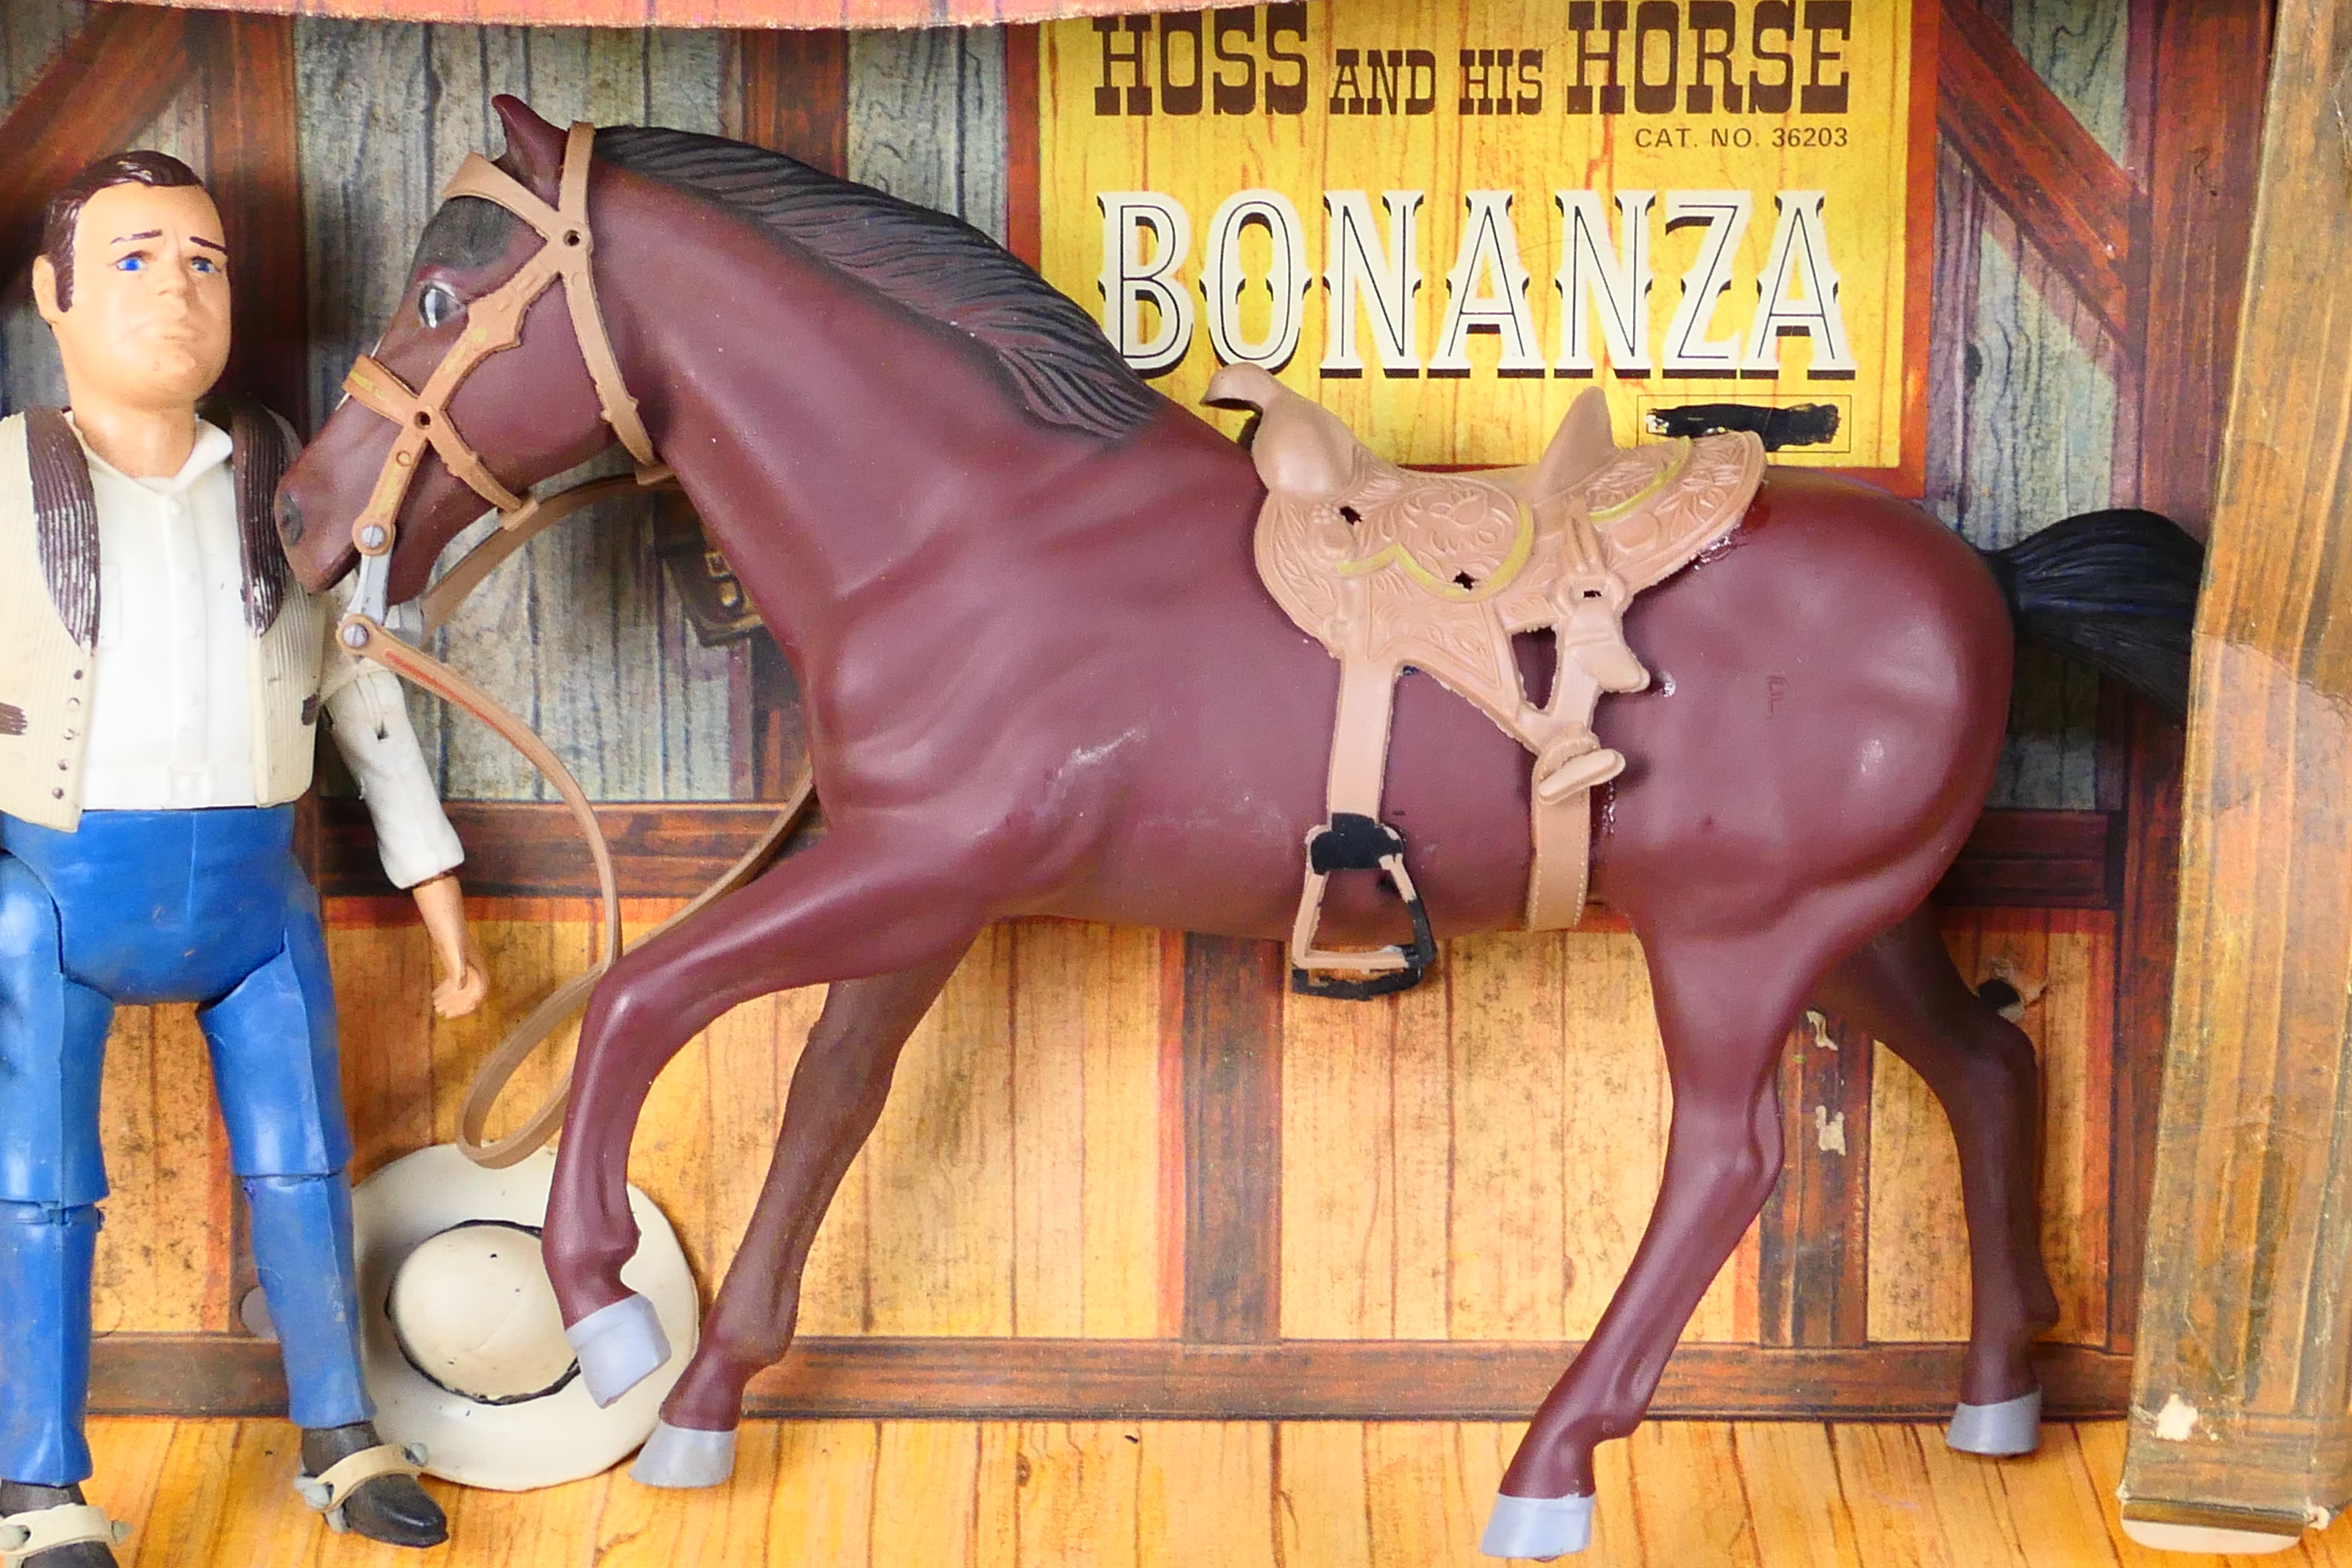 Palitoy - Bonanza - 2 x boxed sets, Ben And His Horse # 36201 and Hoss And His Horse # 36203. - Image 4 of 14